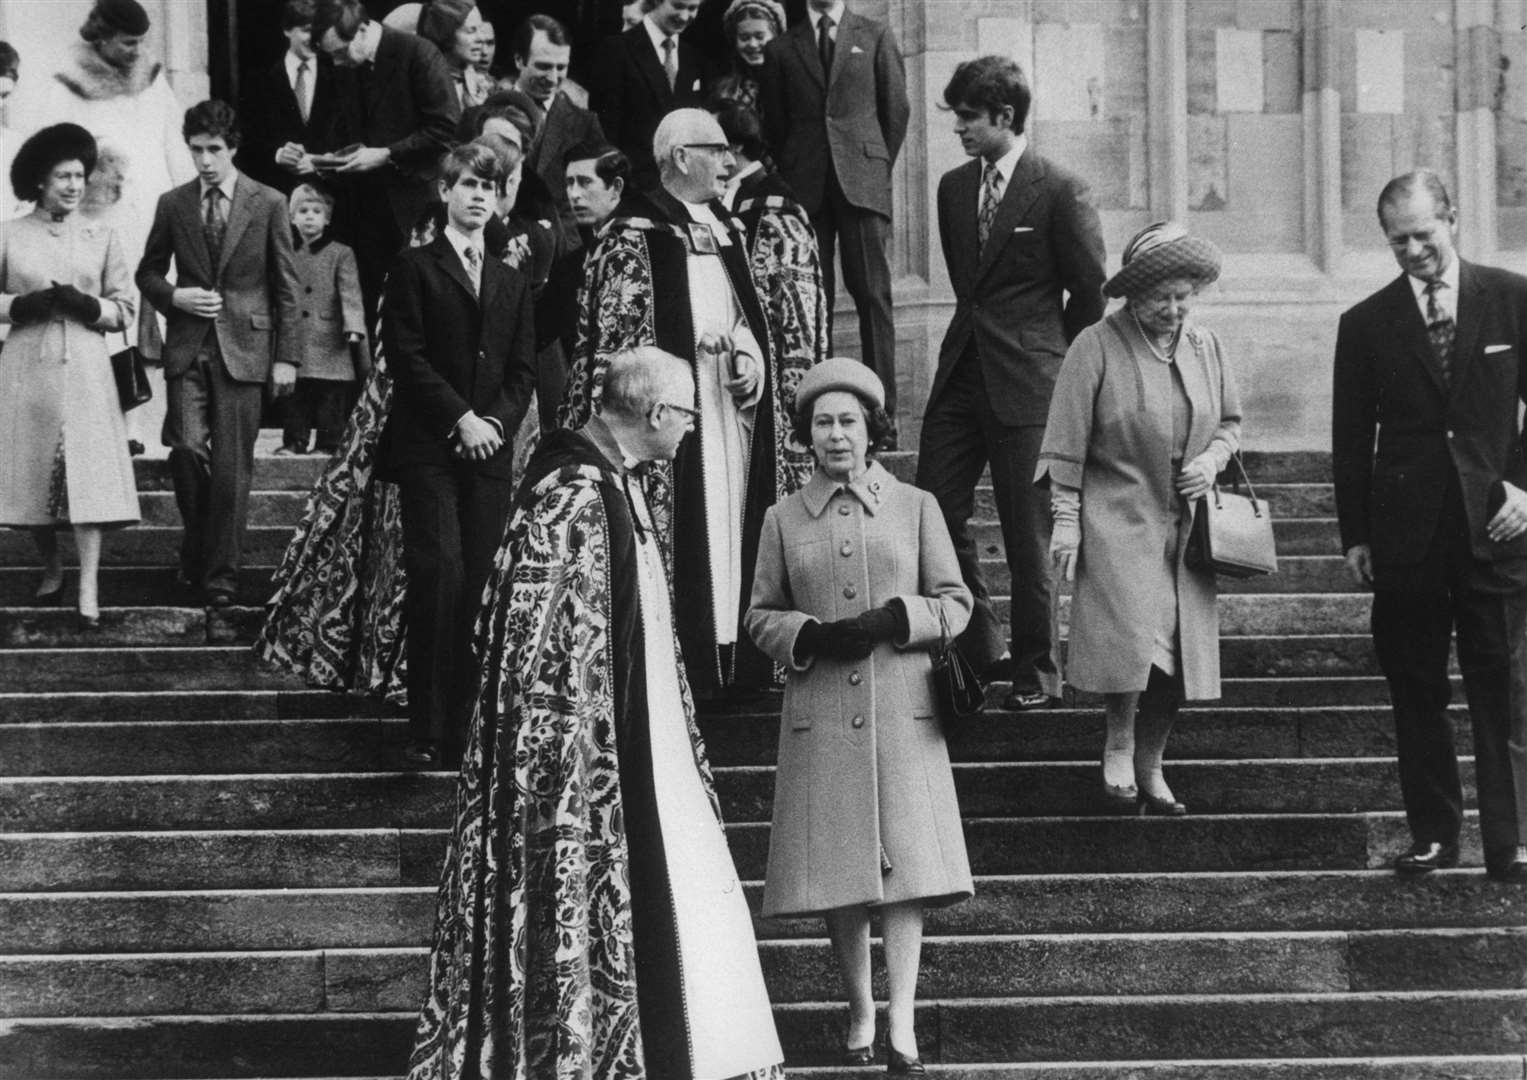 The Queen and other members of the royal family leave St George’s Chapel on Christmas Day in 1978 (PA)